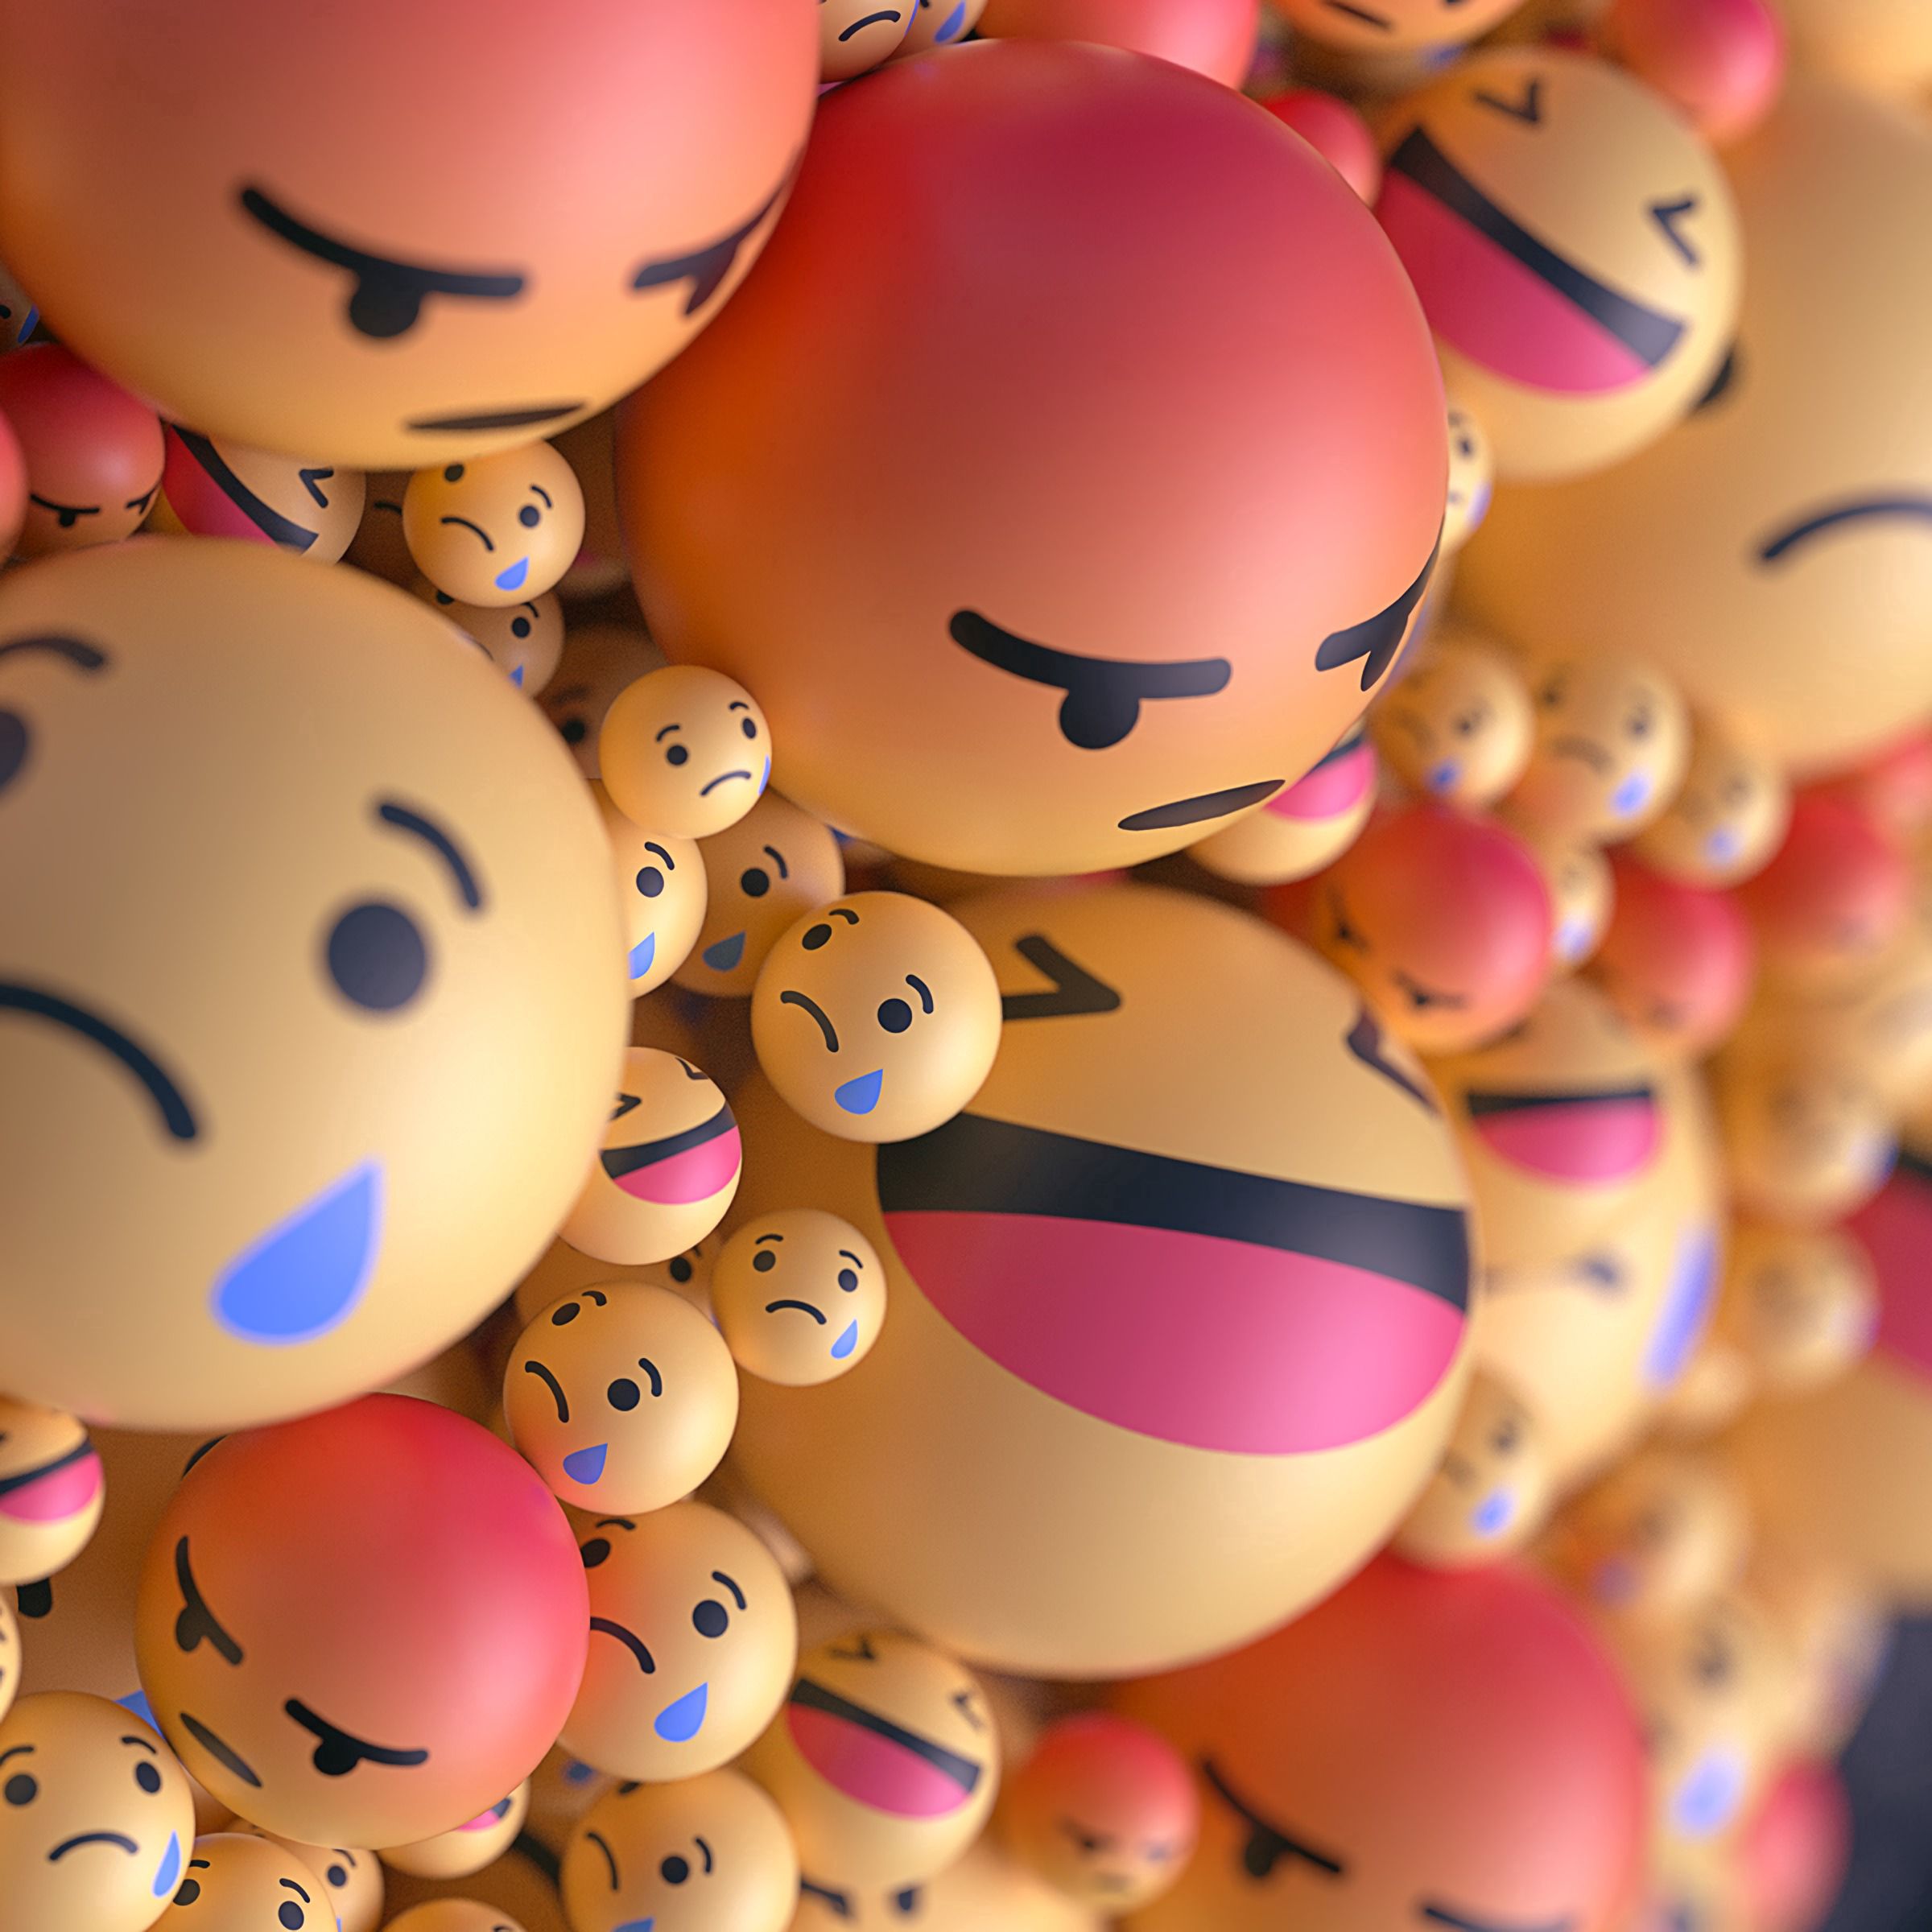 3d, emoticons, smiles, balloons, taw, smilies, smileys, emotions cell phone wallpapers